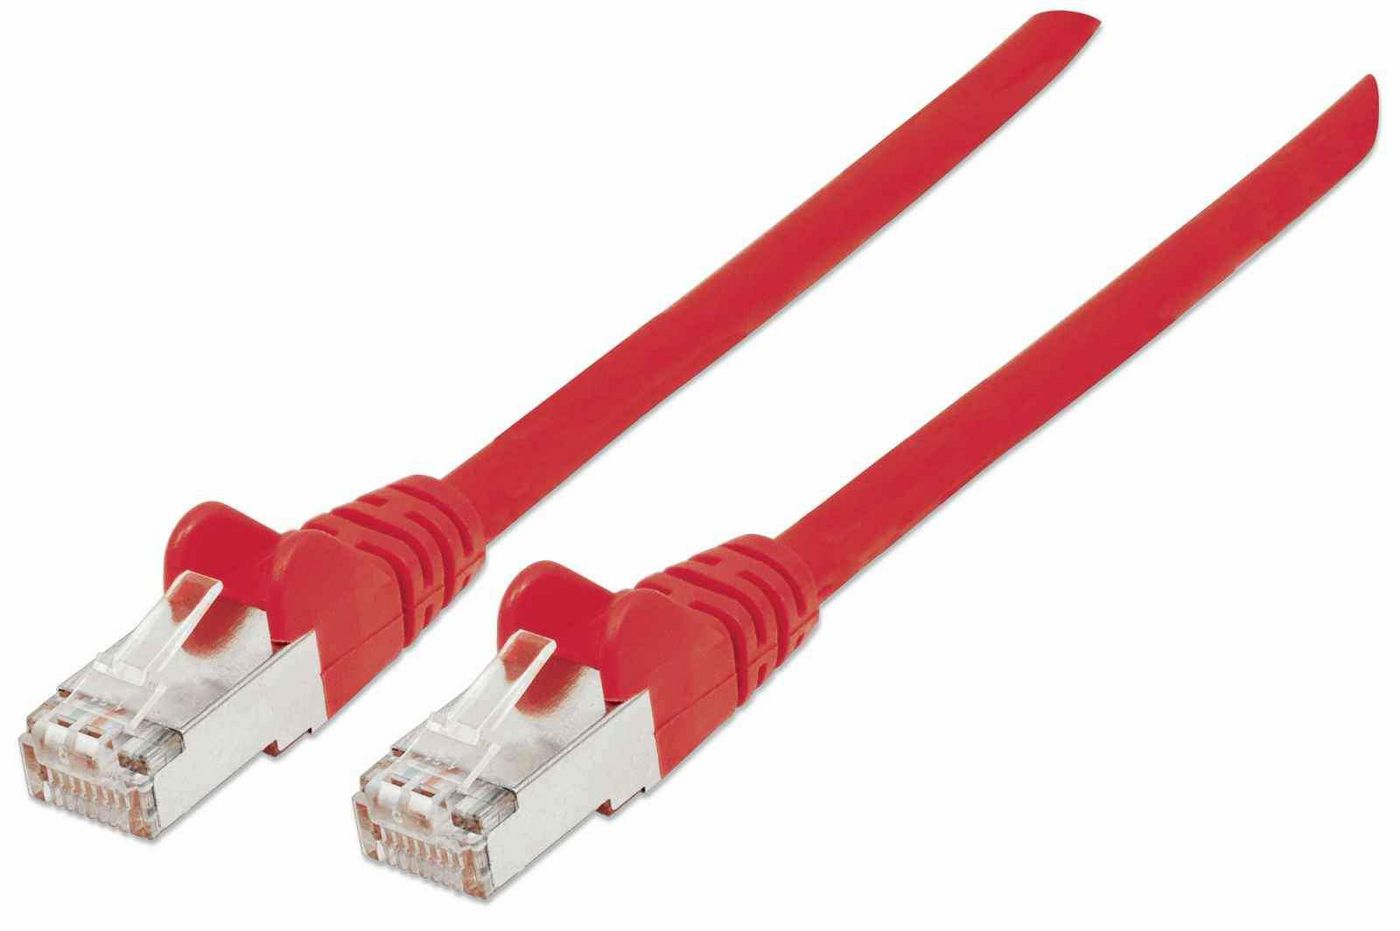 Intellinet 740944 High Performance Network Cable 